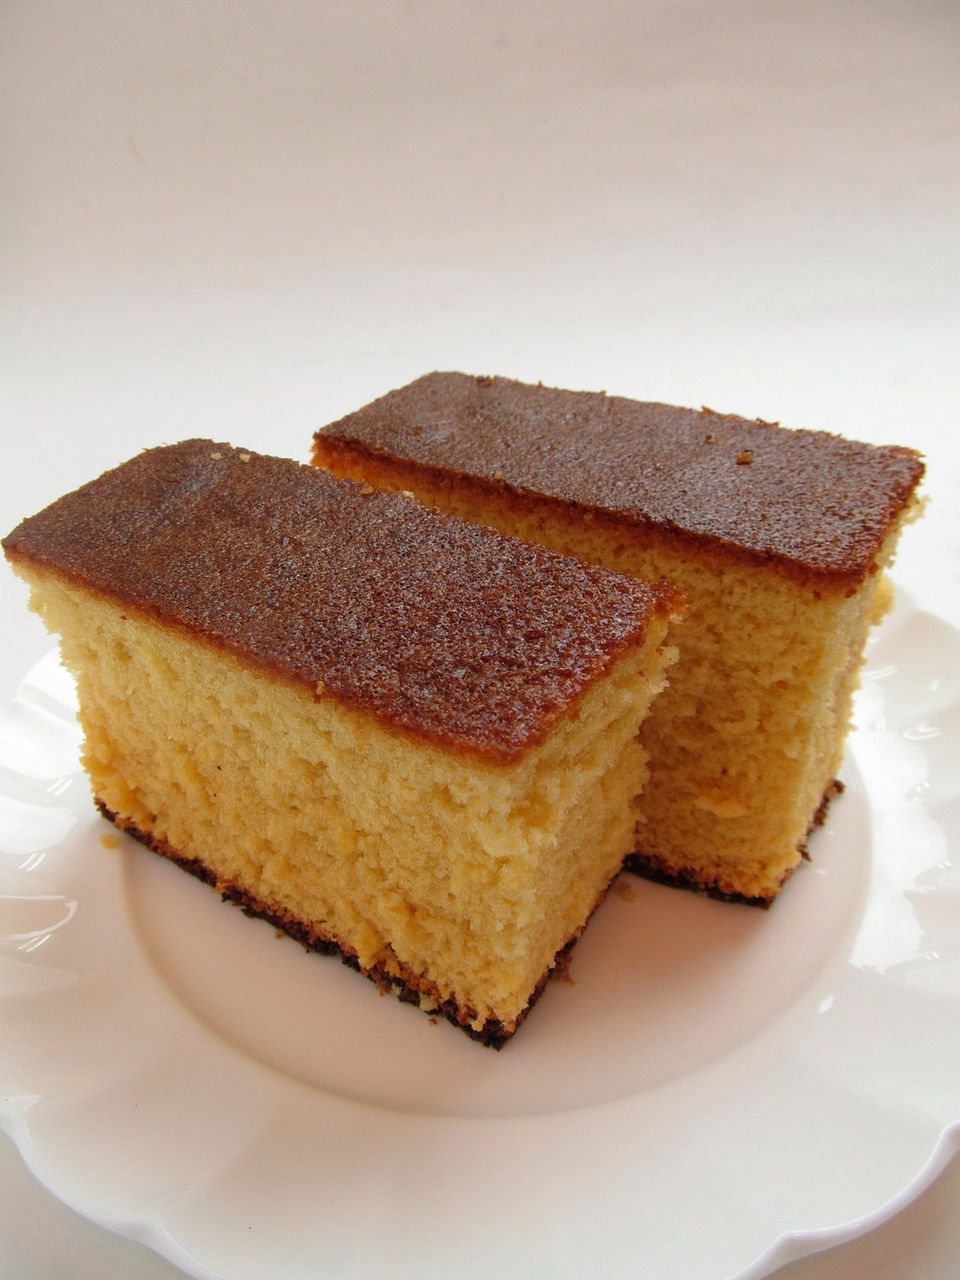 The Castella cake has a characteristic fluffy structure.